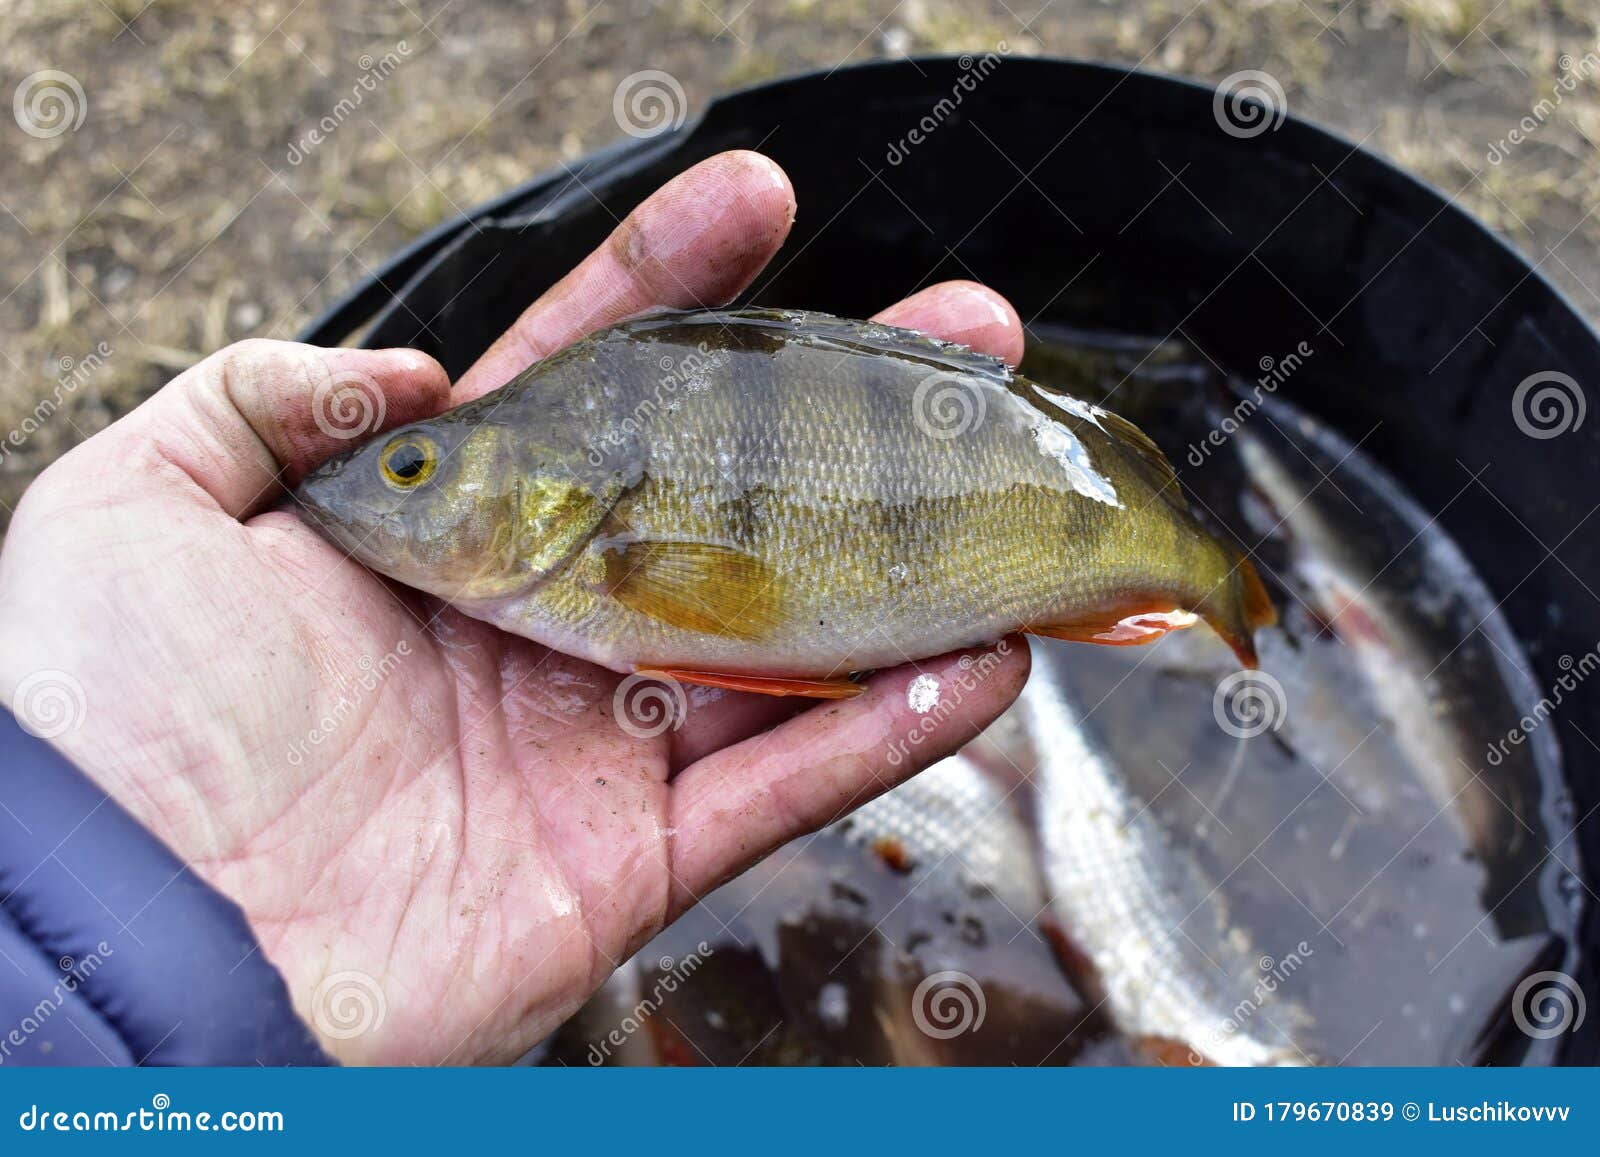 Different Freshly Caught River Fish in the Summer Stock Image - Image of  angling, flakes: 179670839